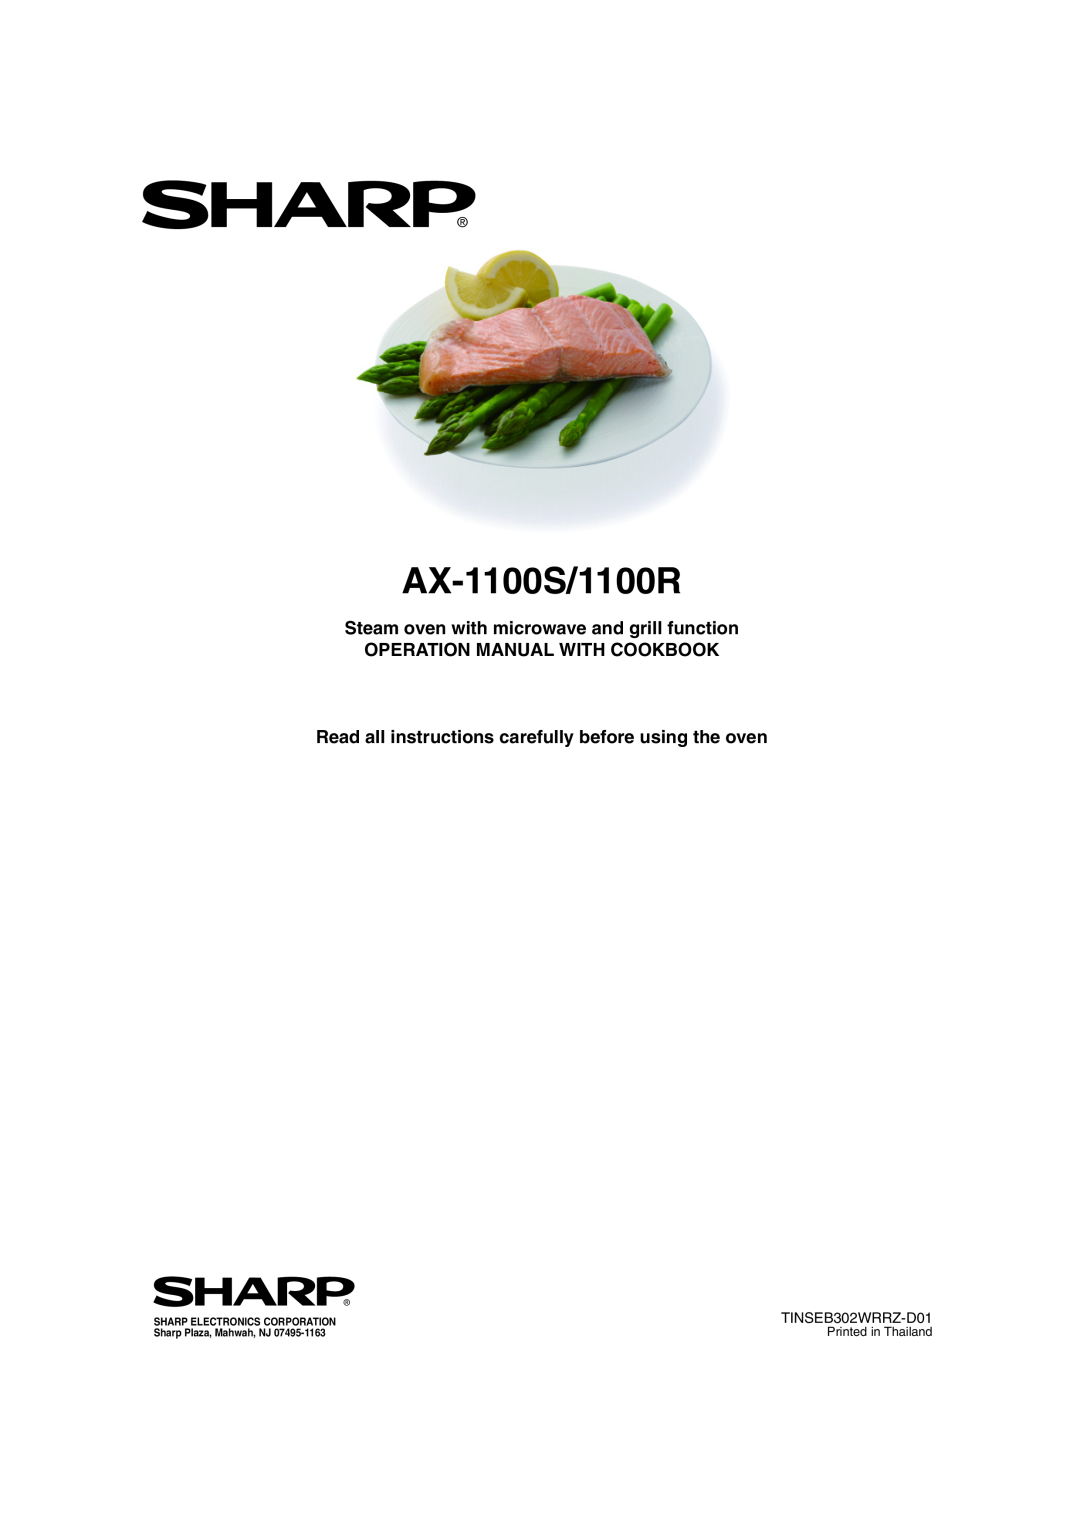 Sharp AX-1100R operation manual AX-1100S/1100R, Steam oven with microwave and grill function, TINSEB302WRRZ-D01 